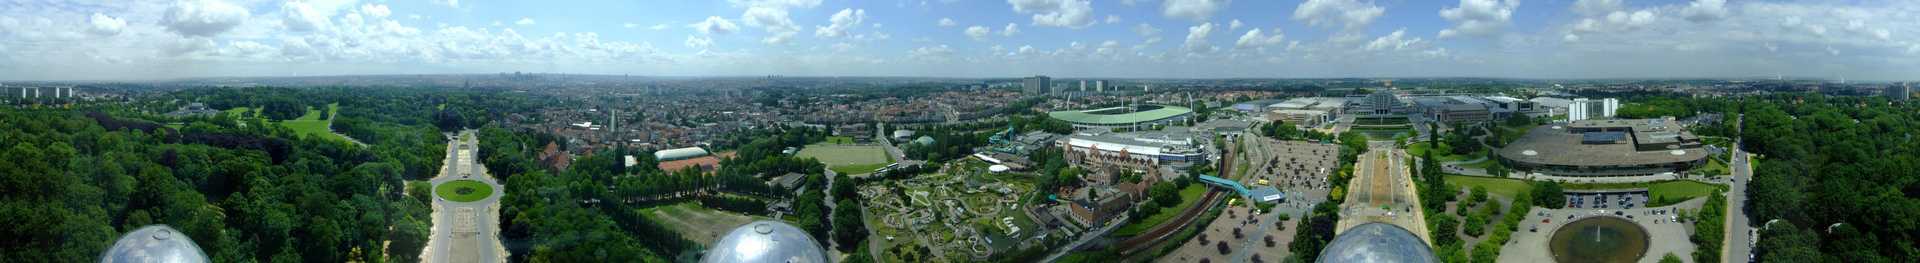 View from the top of the Atomium in Brussels